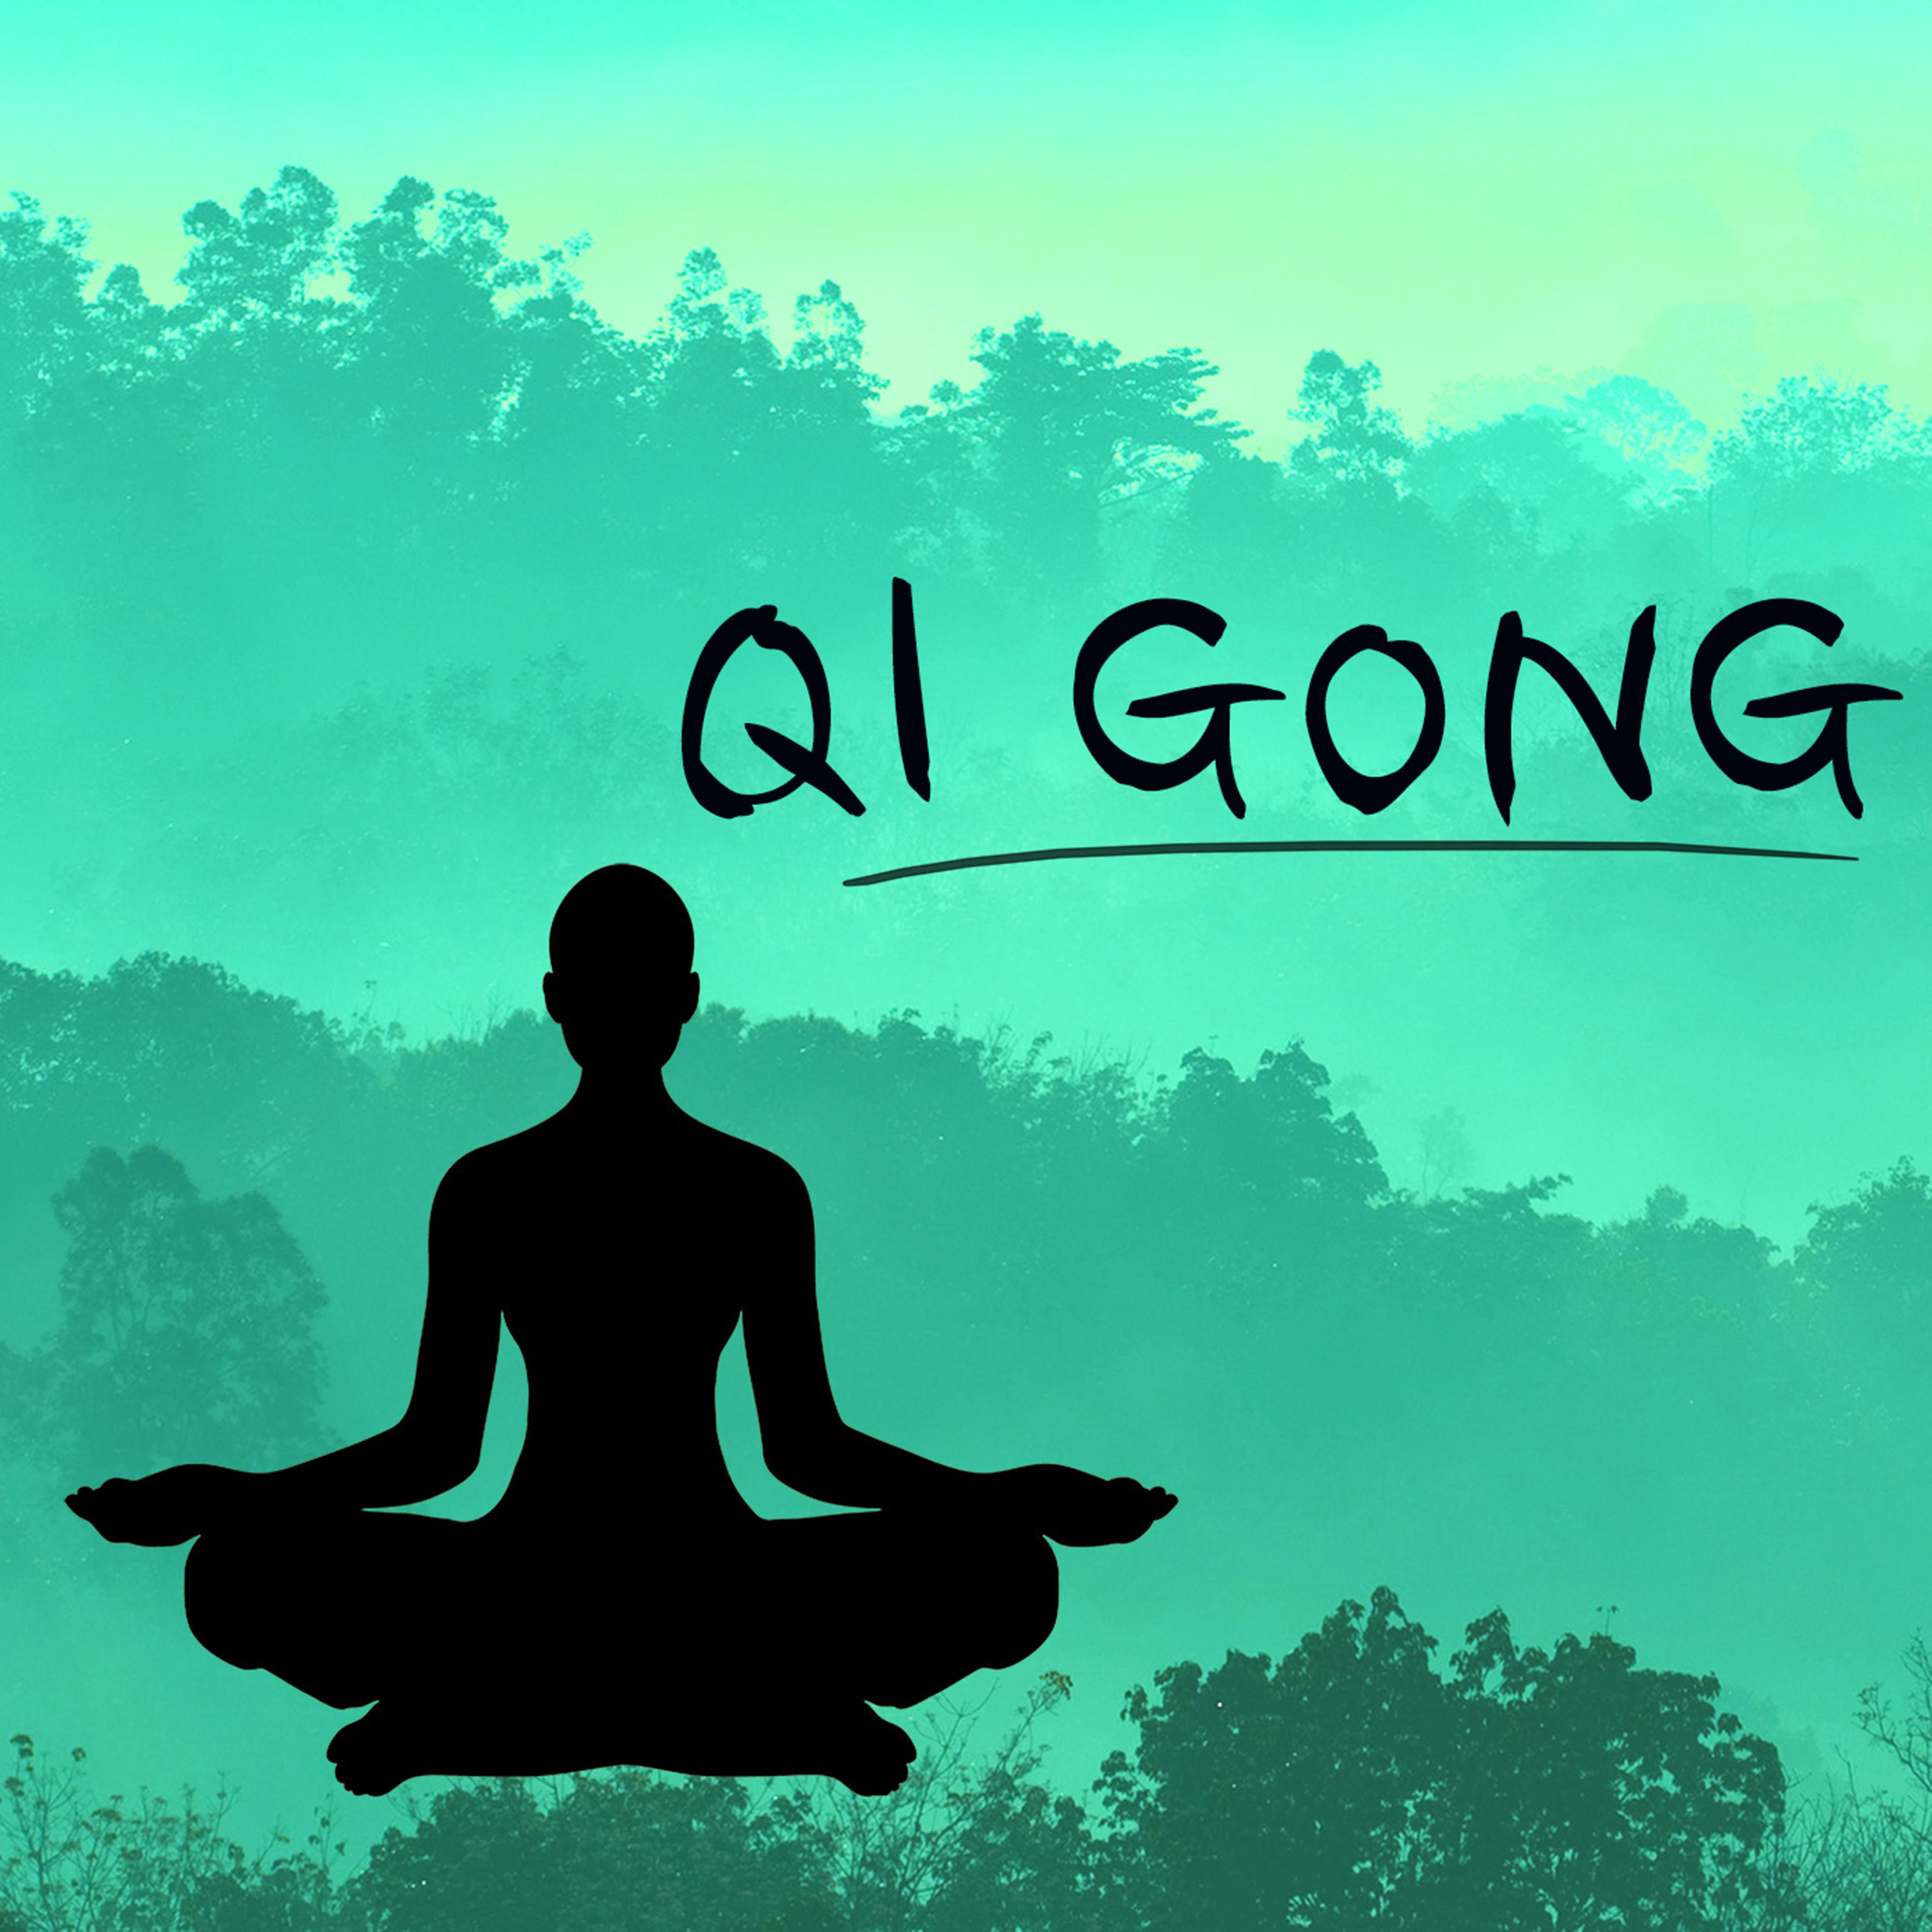 The Way of Qi Gong